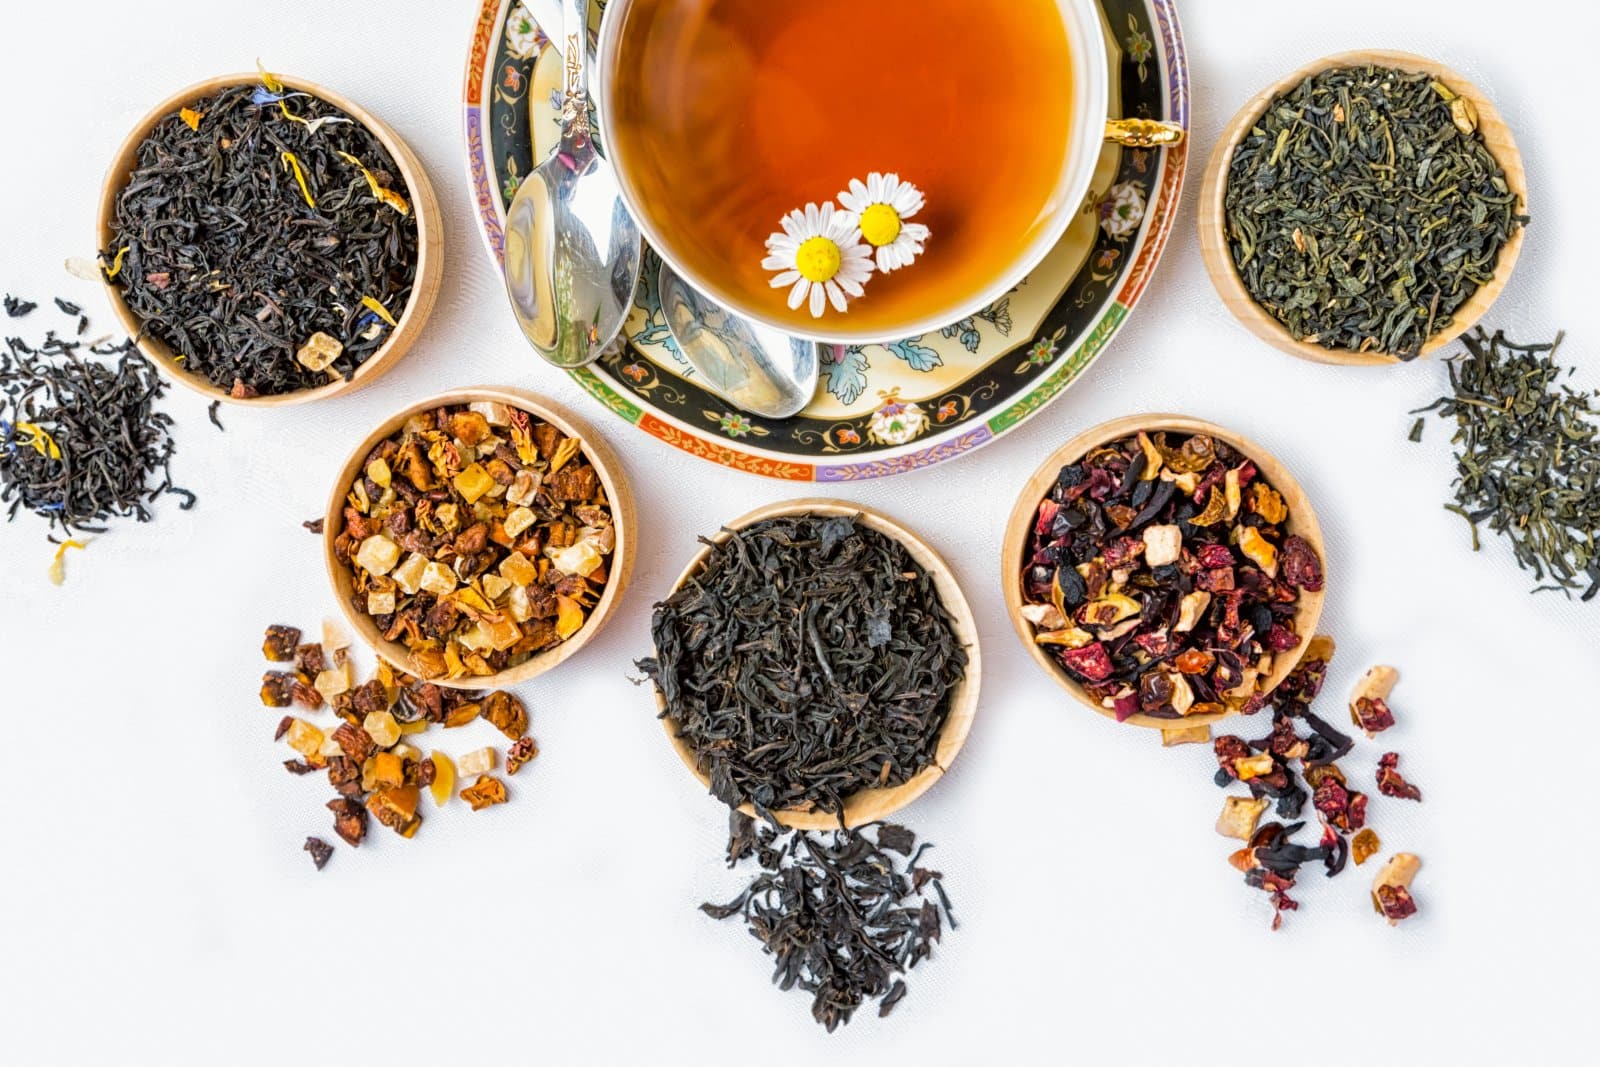 Image Credit: Shutterstock /liliya Vantsura <p><span>Herbal teas like chamomile, lavender, and peppermint can promote relaxation and calmness, making them excellent choices for reducing stress and promoting mental well-being. Additionally, beverages like green tea and matcha contain compounds like L-theanine, which has been shown to have calming effects on the brain. Real-life examples include winding down with a cup of chamomile tea before bed or enjoying a matcha latte as a mid-afternoon pick-me-up.</span></p>